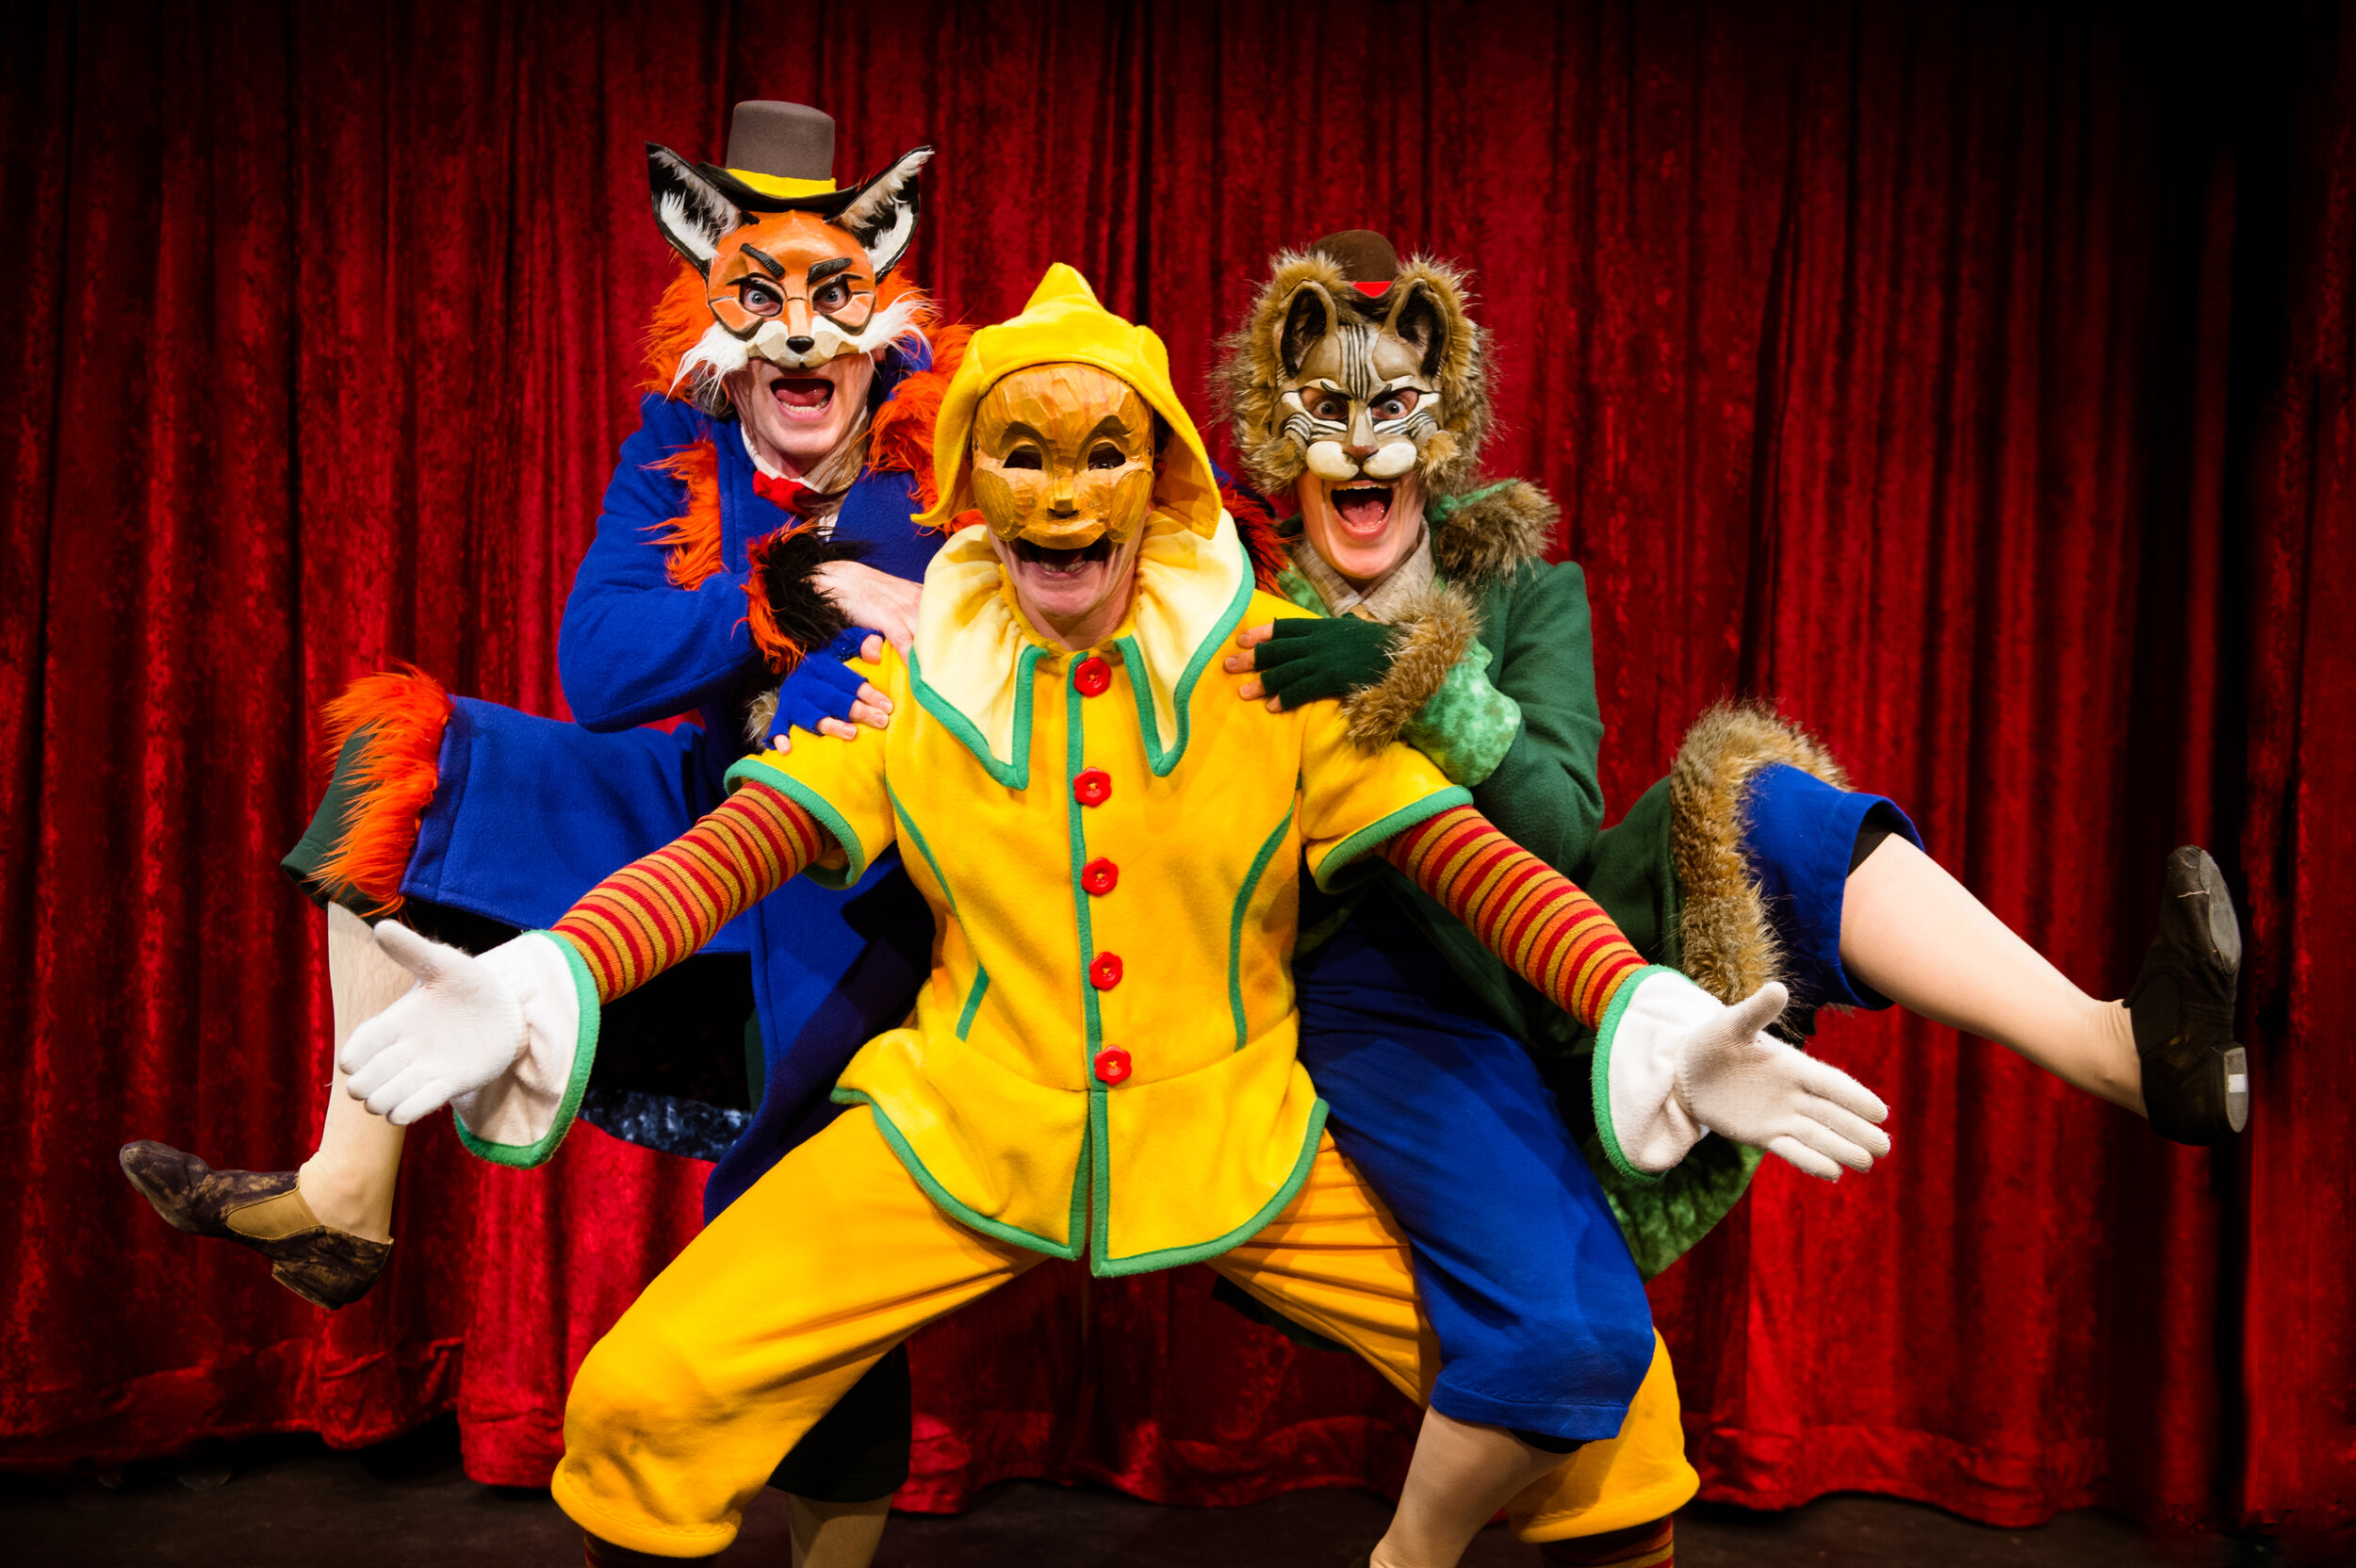  Production photo from  Pinocchio!  Co-produced by Faction of Fools and NextStop Family, March 8 – 30. Costumes by Lynly Saunders, Masks by Waxing Moon Masks, Set Design by Daniel Flint. L to R: Toby Mulford, Jack Novak, and Hannah Sweet. Photo by Tr